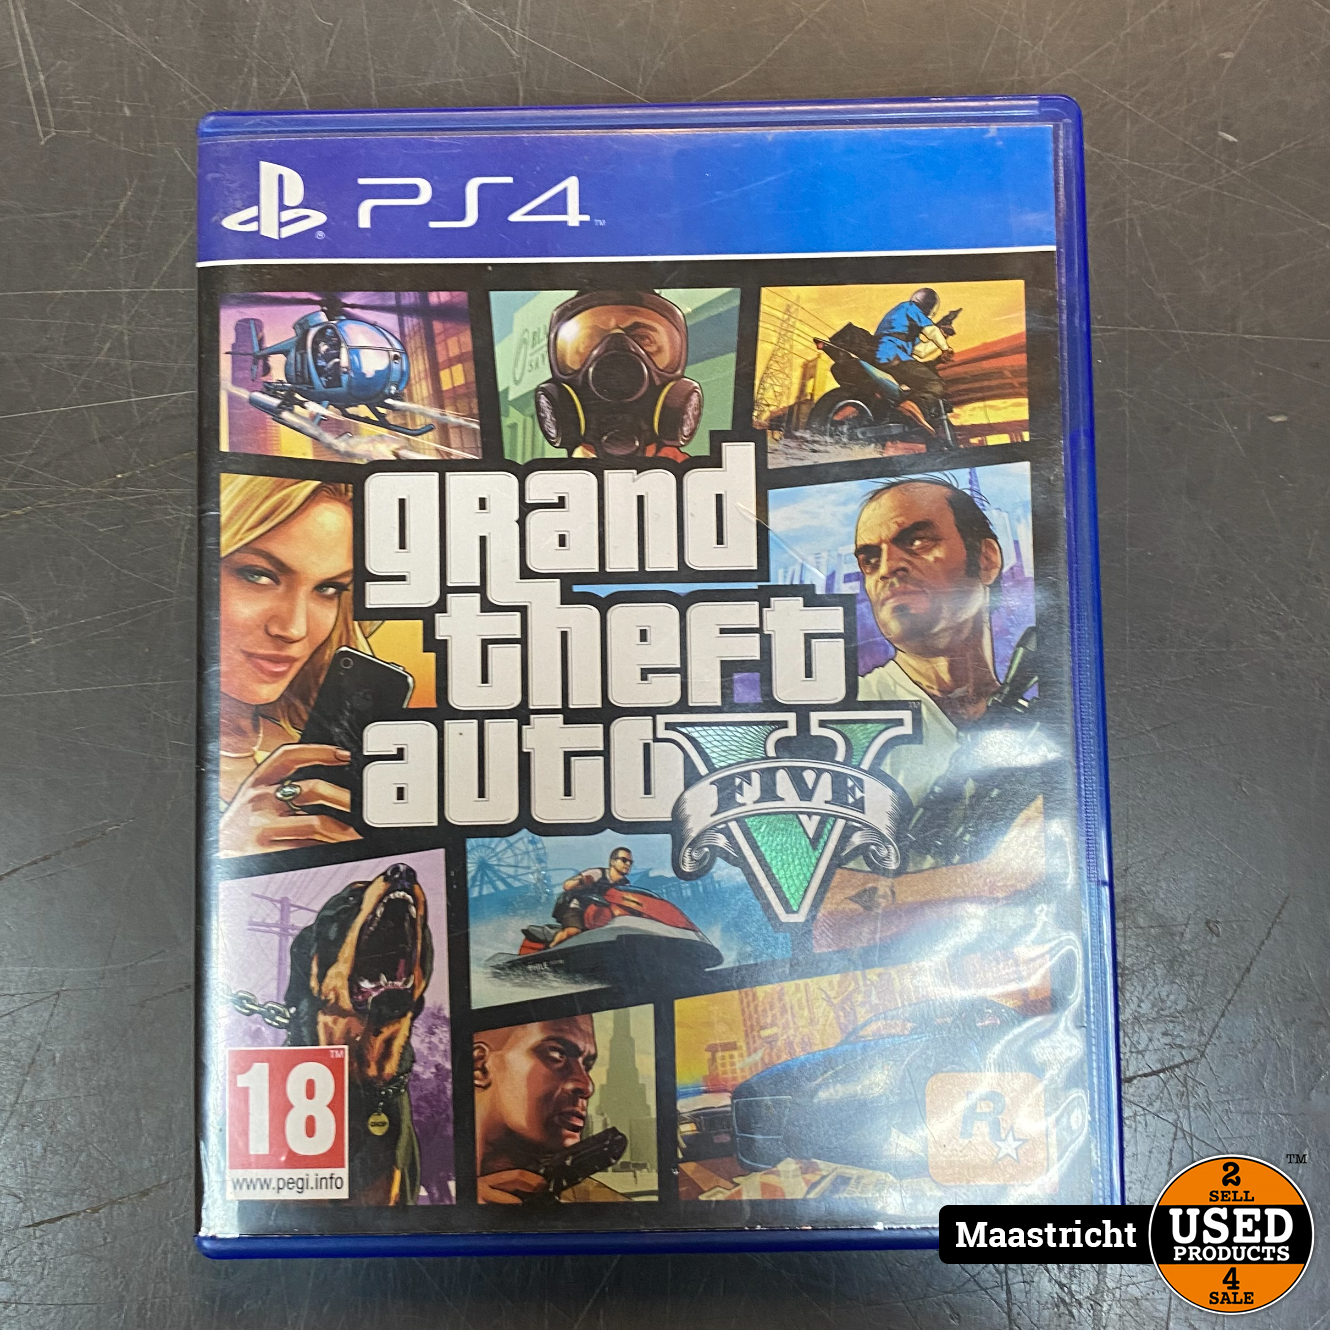 landbouw Pakket Goed Playstation Grand Theft Auto 5- PS4 - Used Products Maastricht